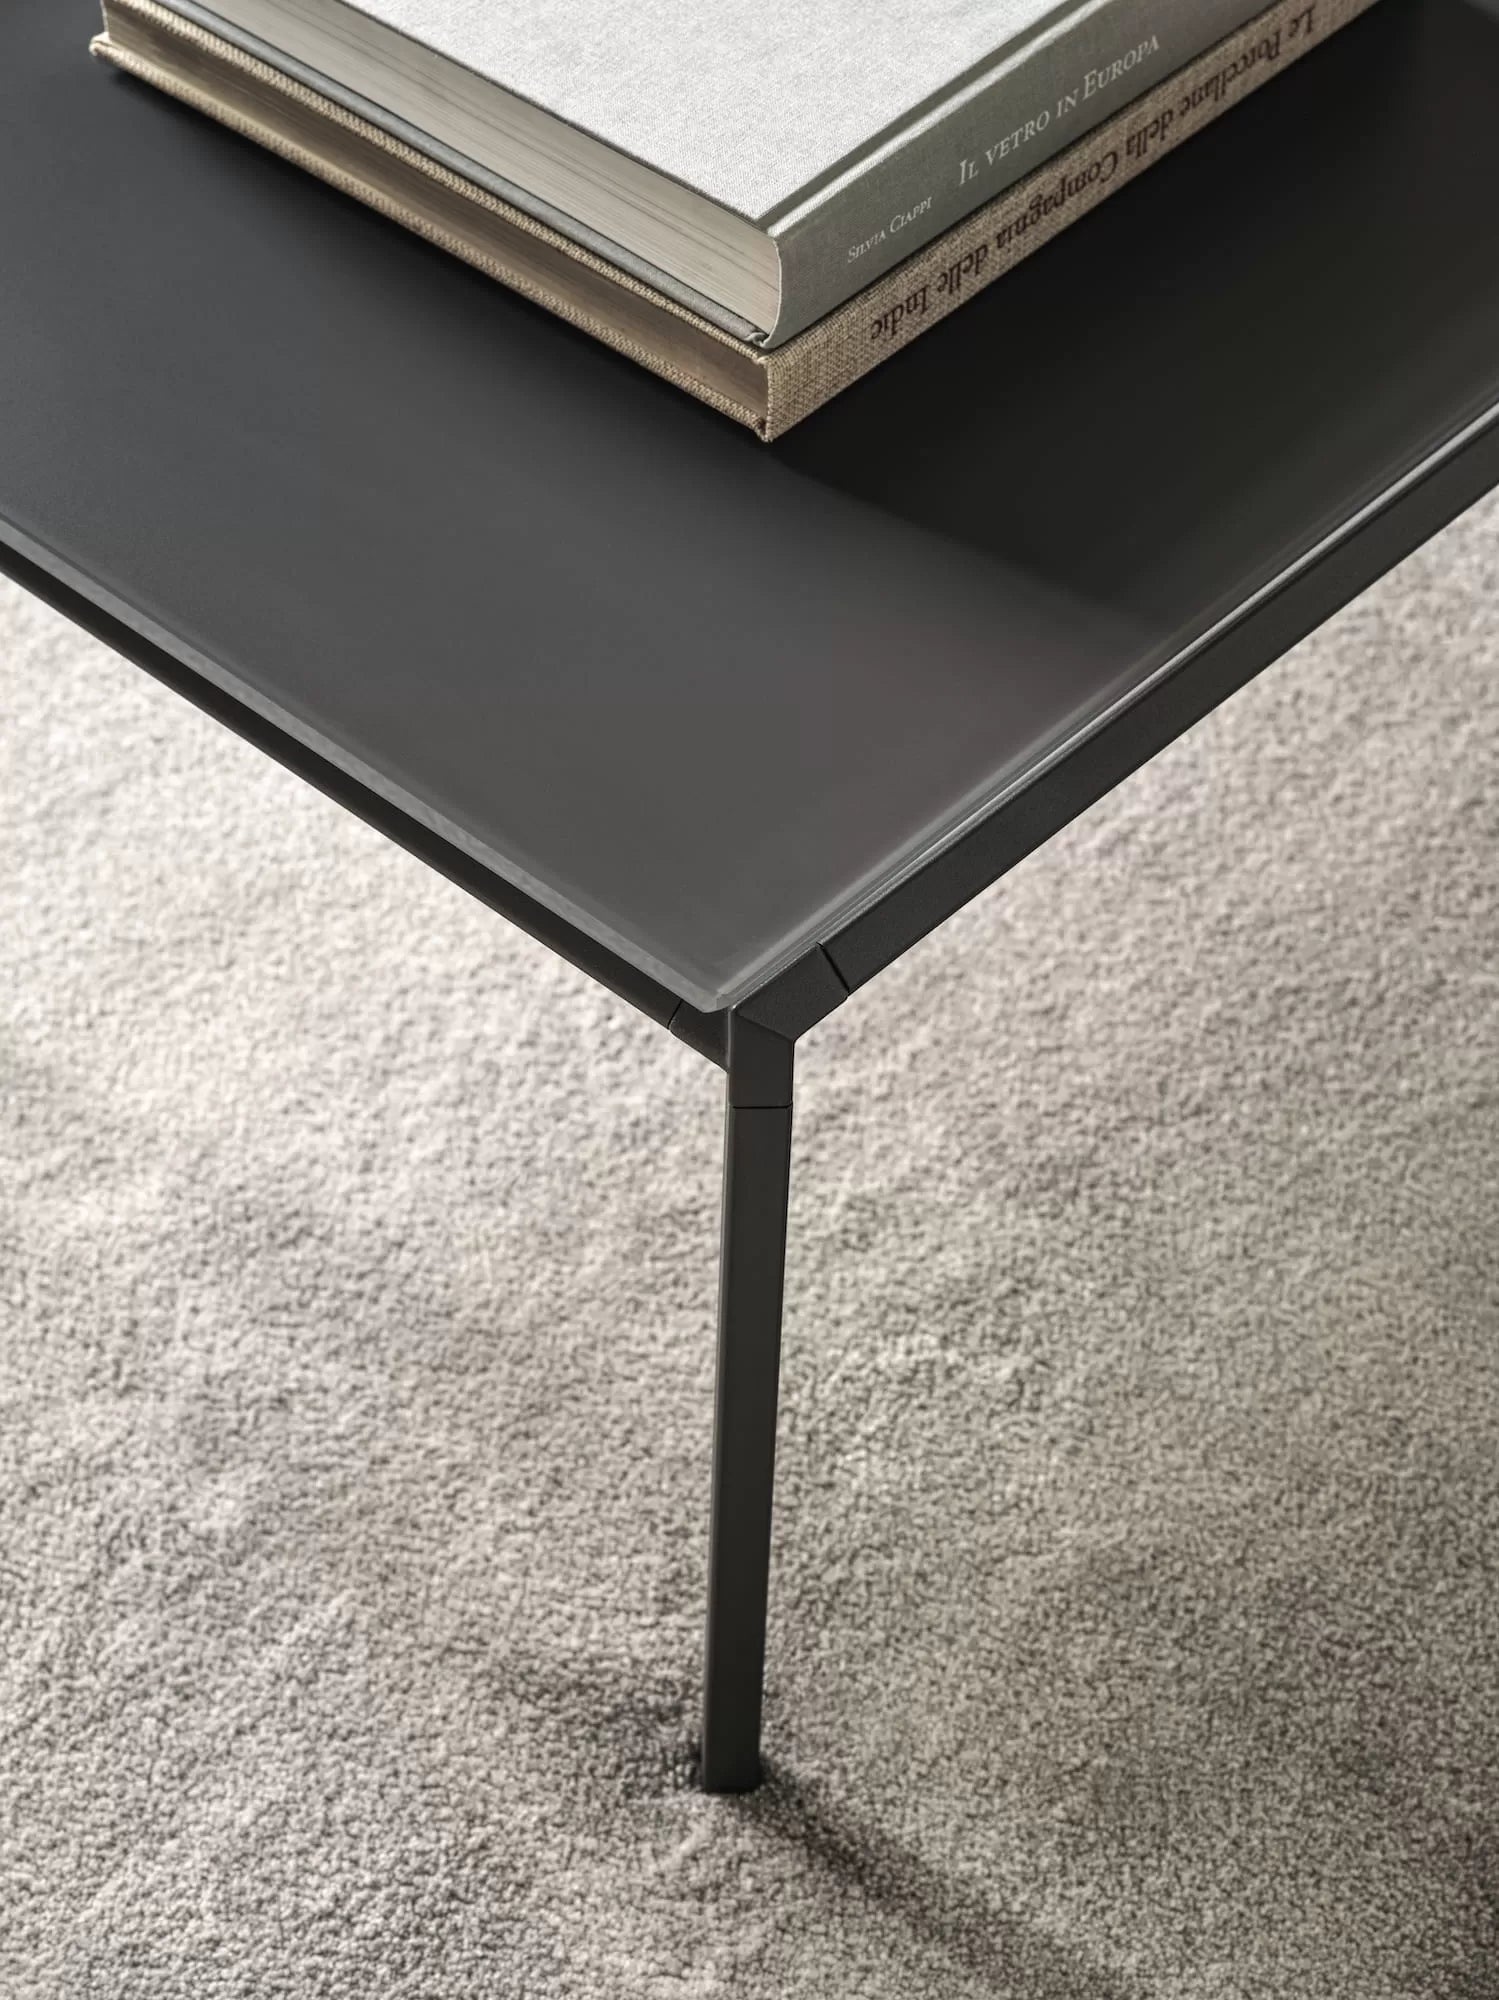 Diagonal Coffee Table With Lacquered Metal Frame 06 04